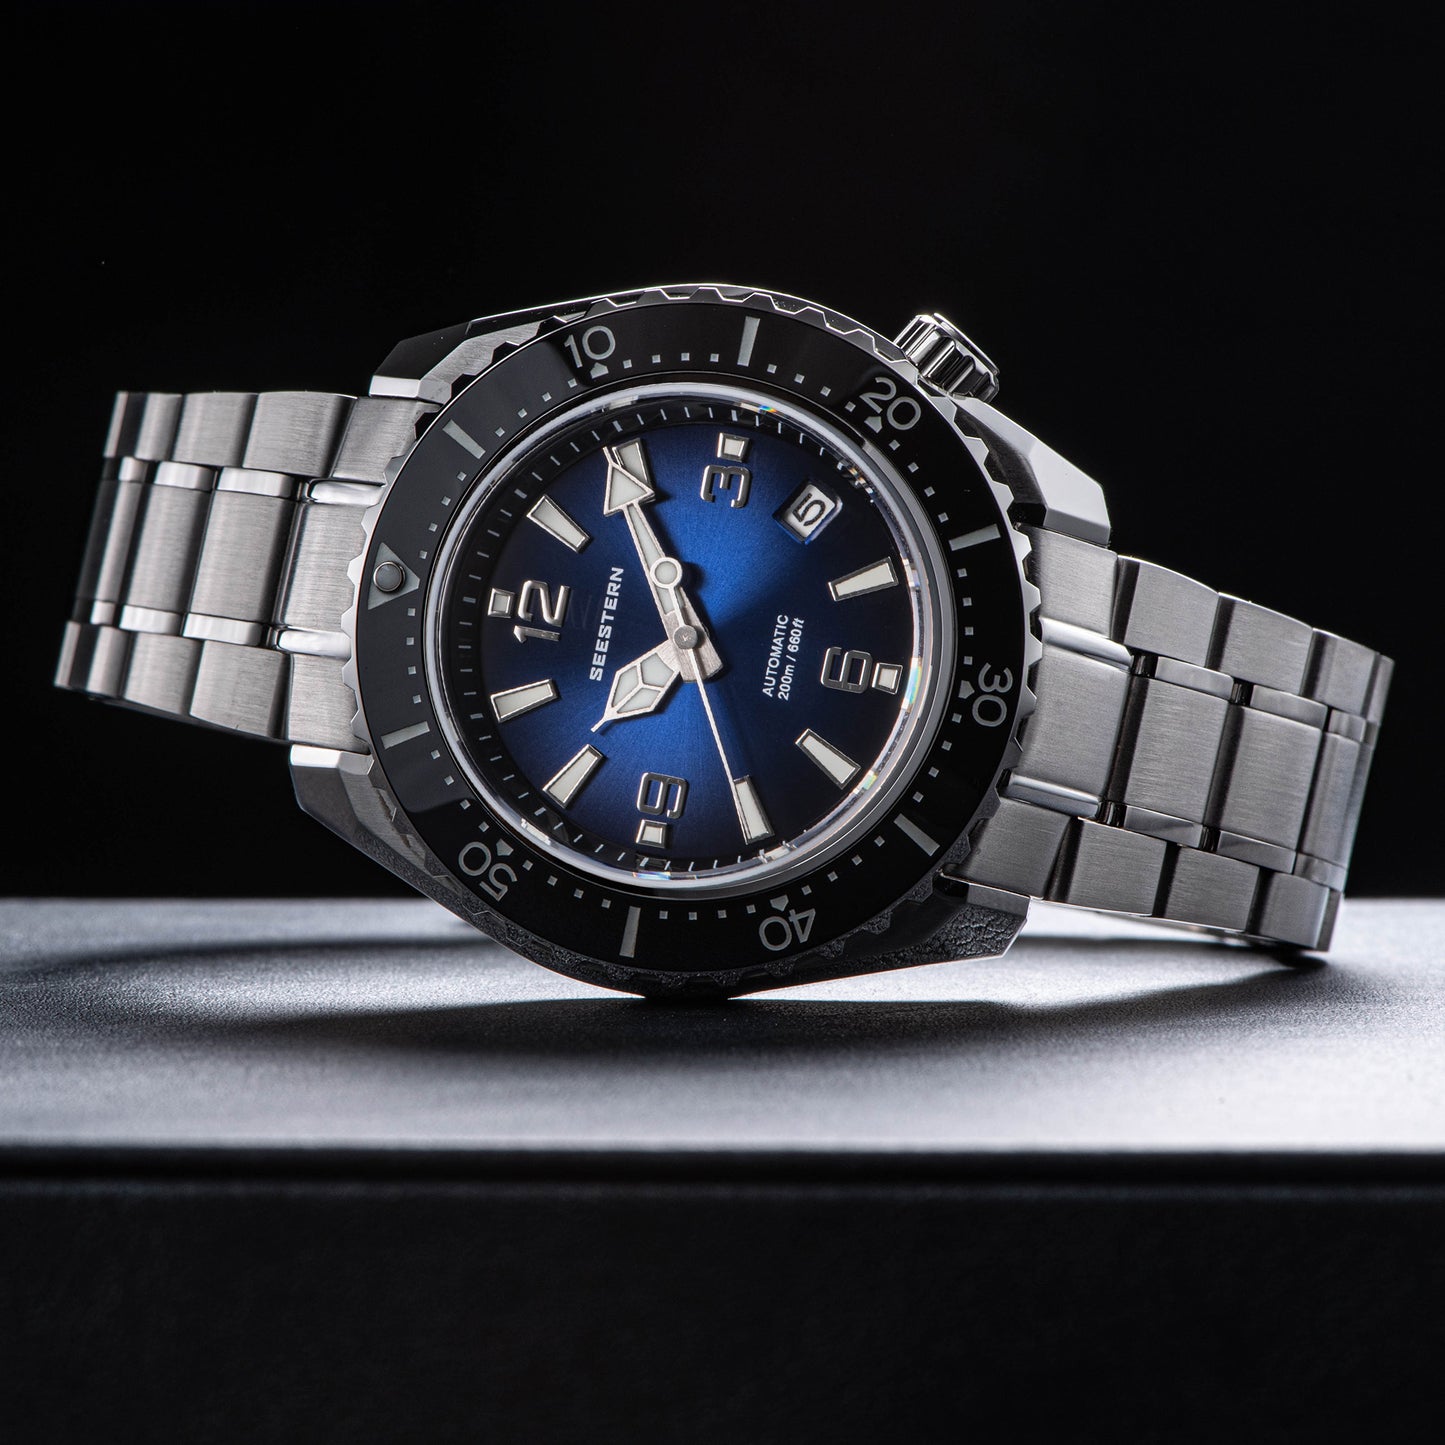 Seestern 416 Professional Diver Watch S416BL Blue Dial